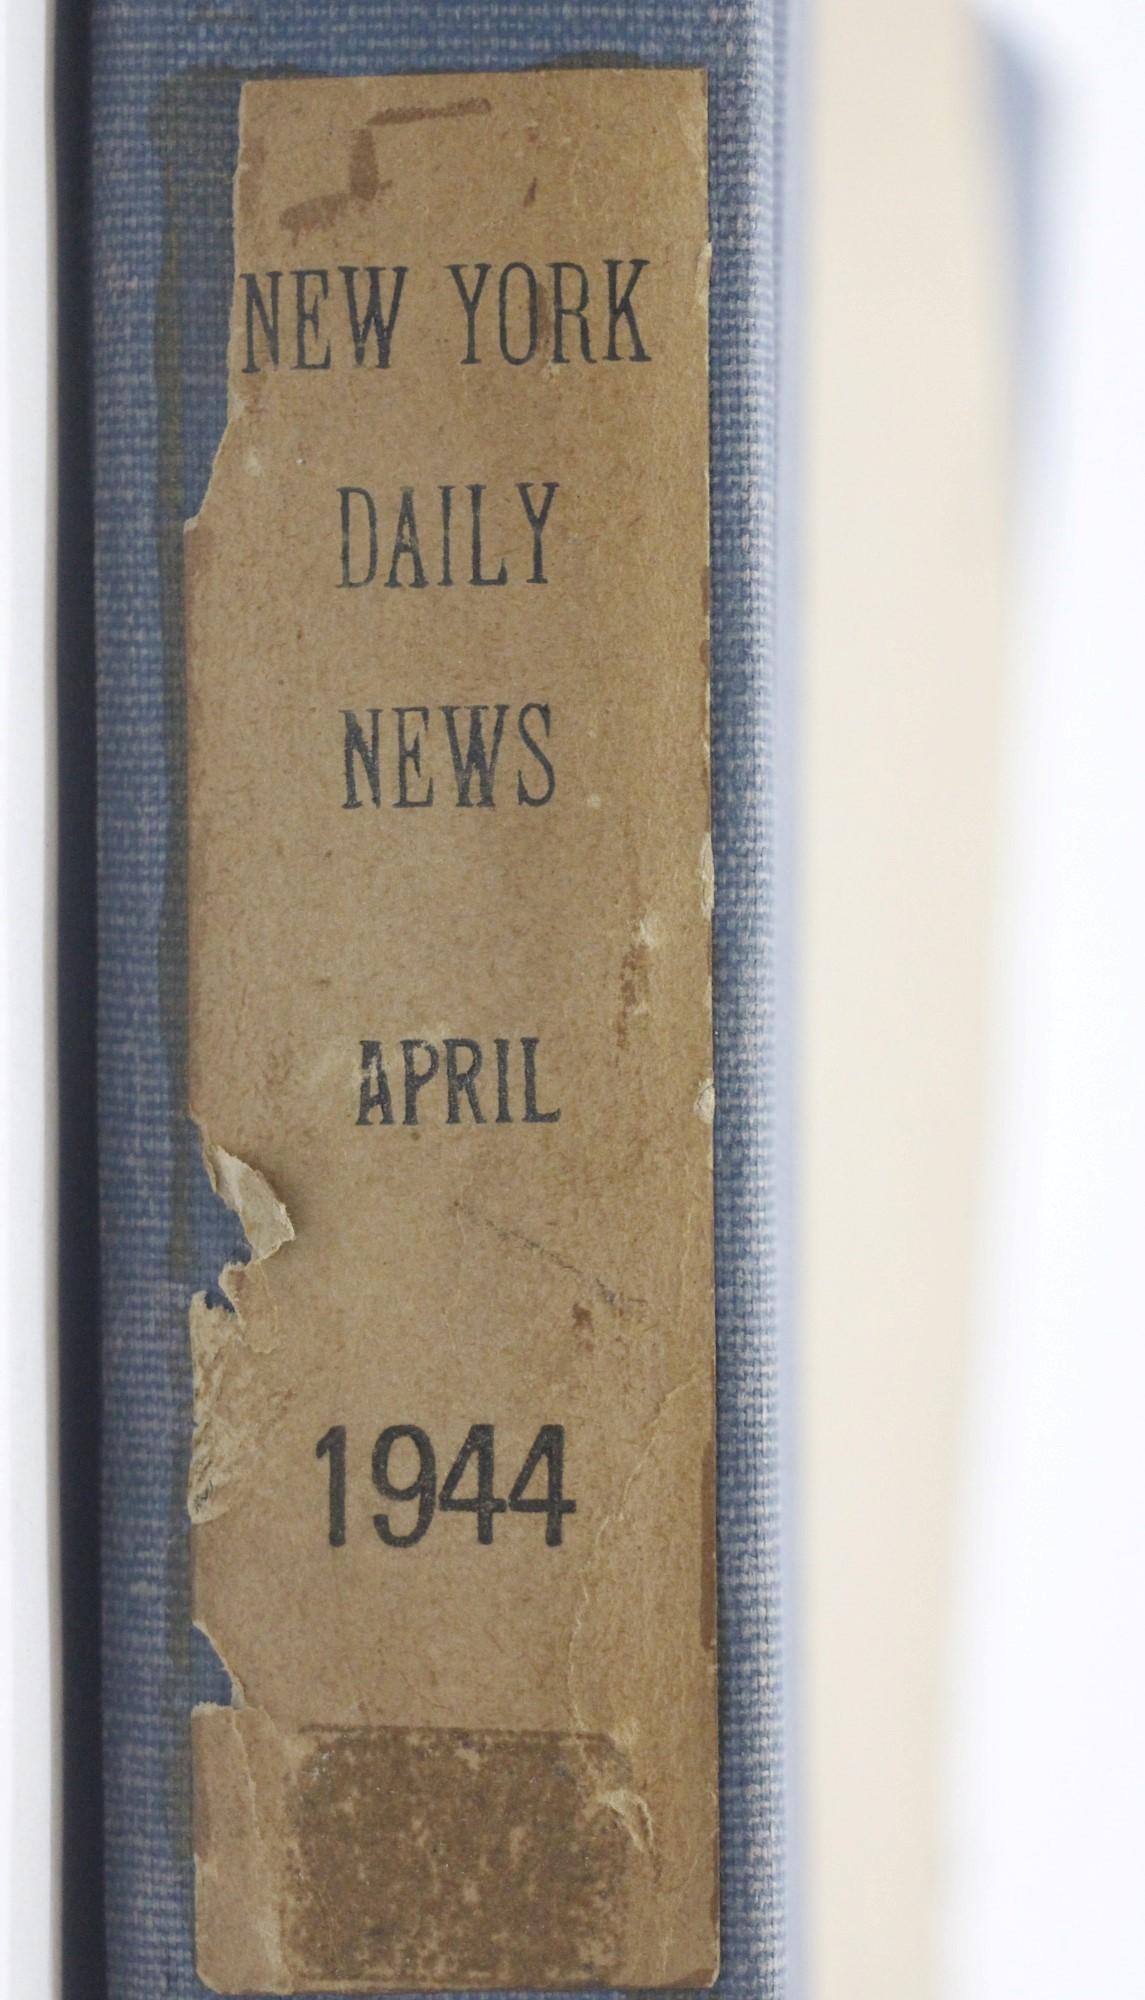 April 1944 Book of New York Daily News Newspapers Bound Together 6